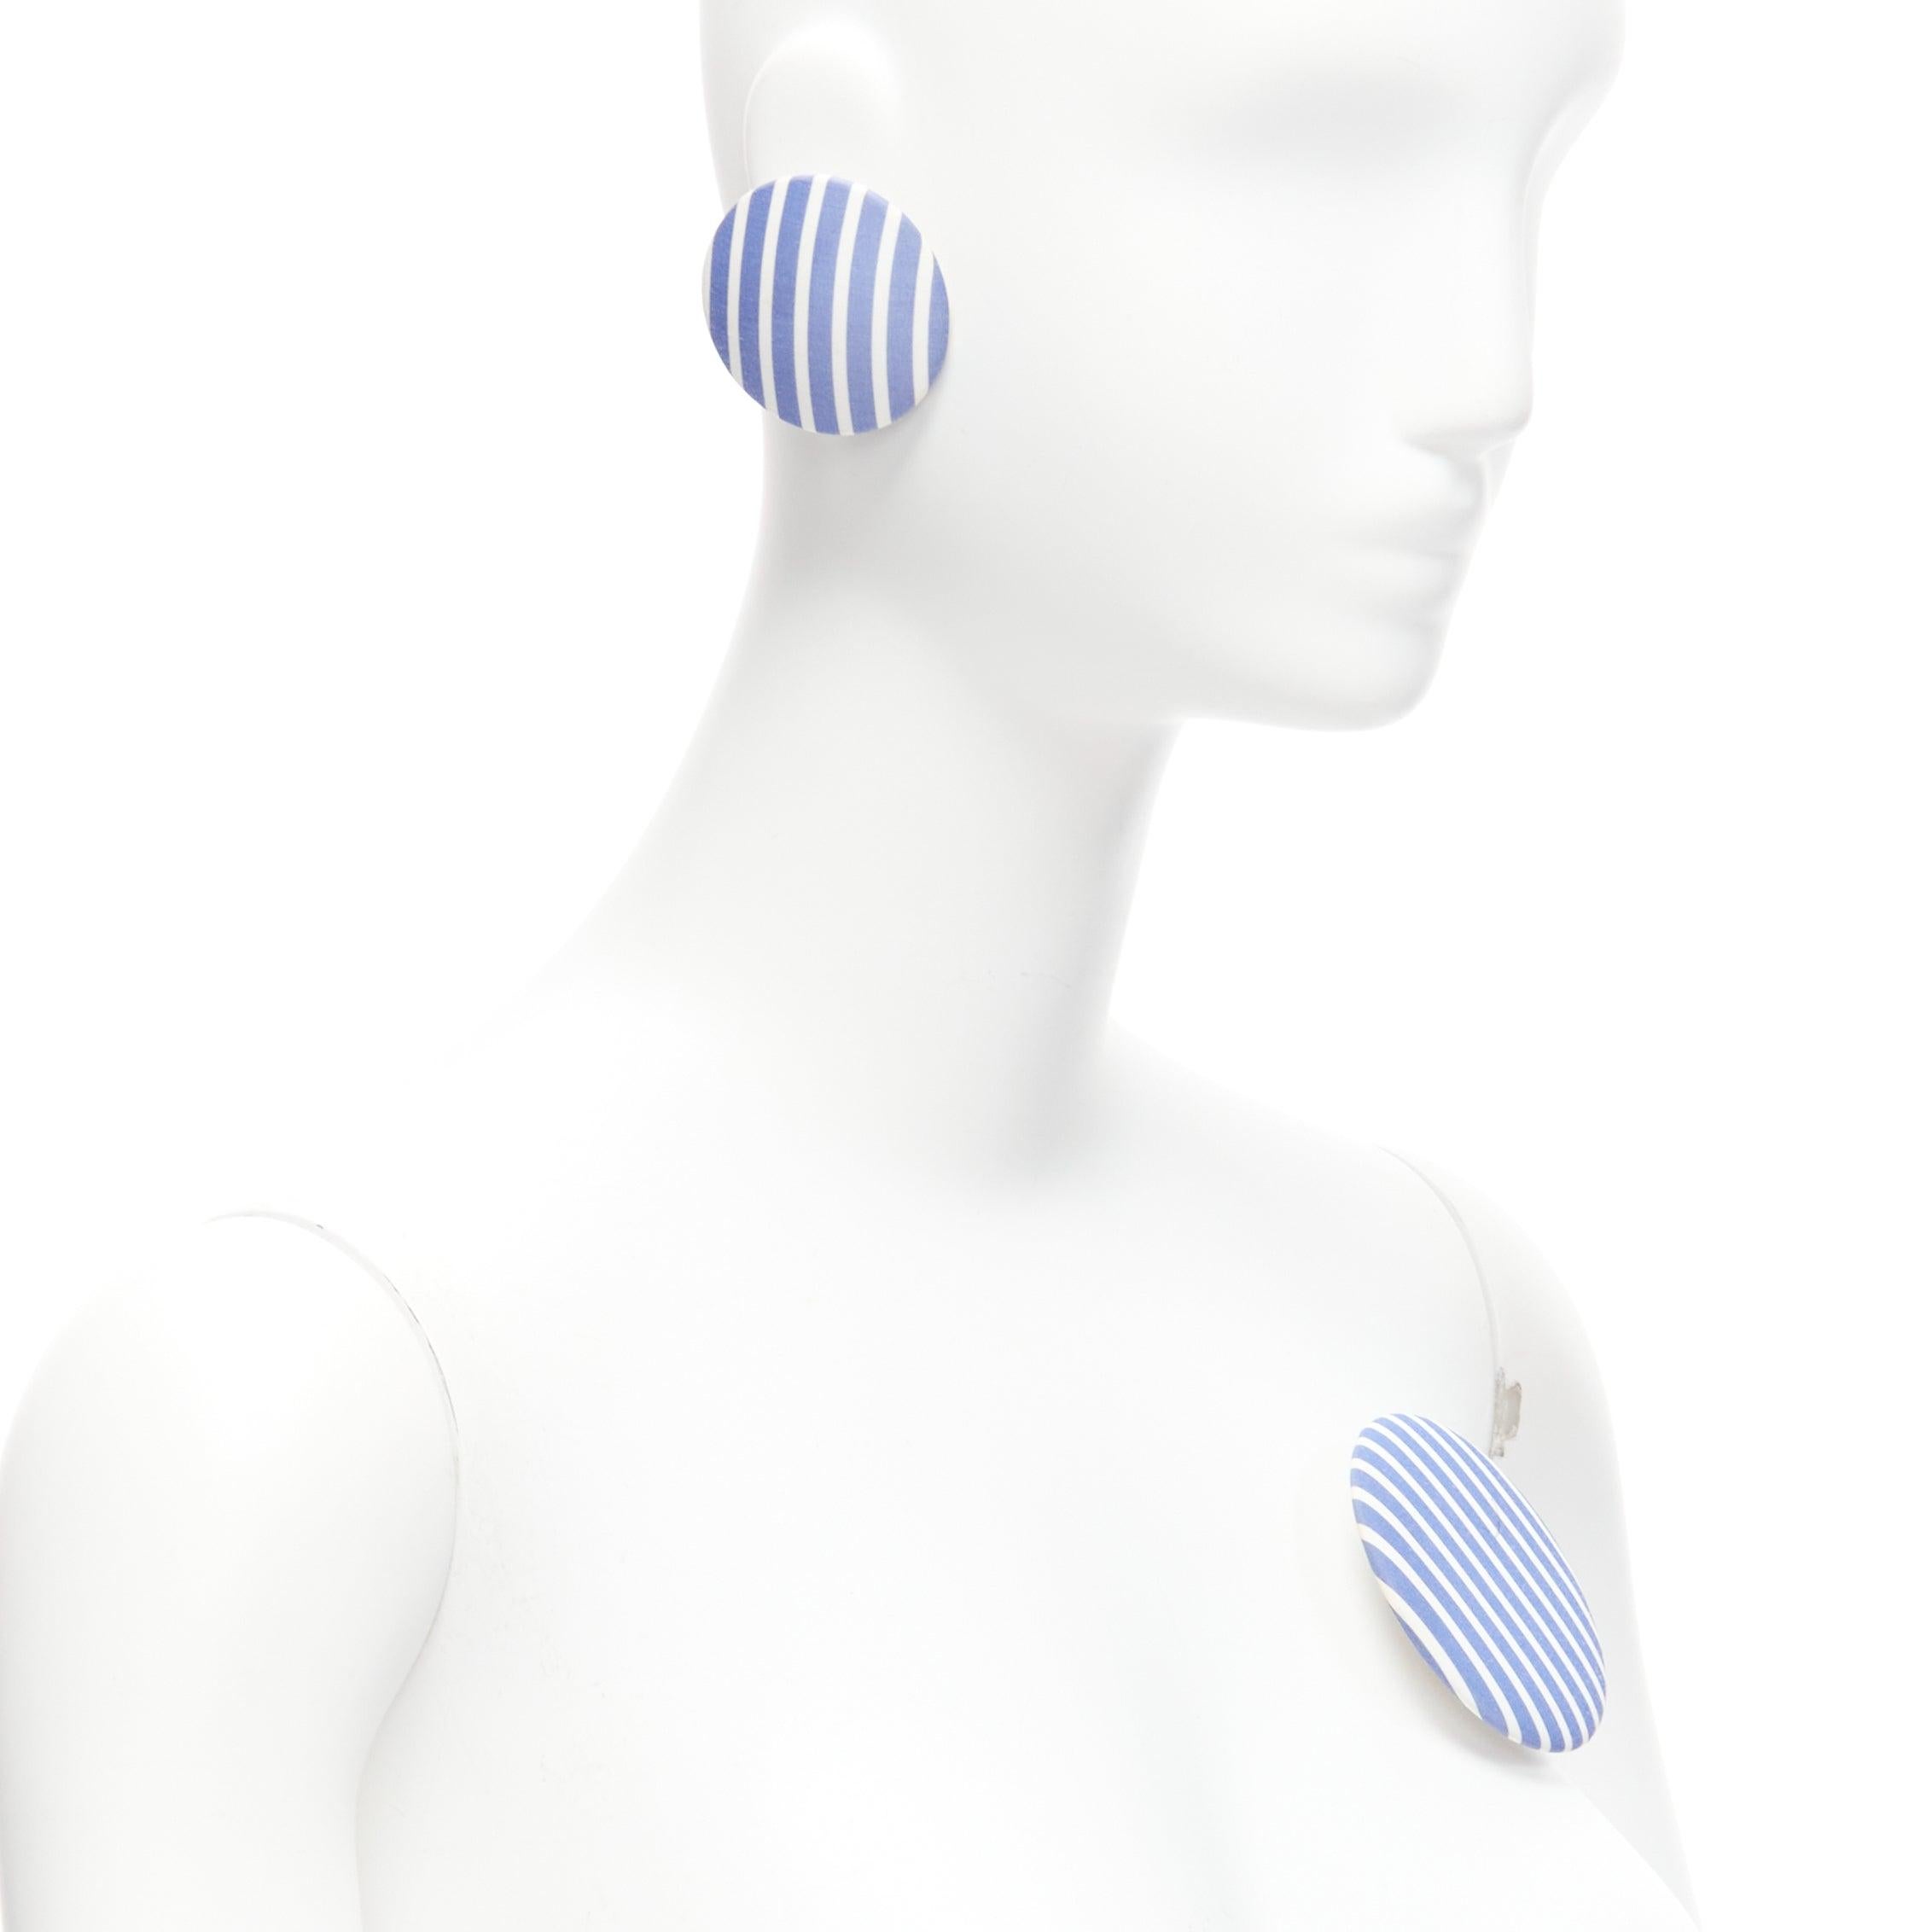 BALENCIAGA blue stripes fabric round badges studs earrings Set 3
Reference: BSHW/A00112
Brand: Balenciaga
Designer: Demna
Material: Fabric
Color: Blue, White
Pattern: Striped
Closure: Pin
Lining: Silver Metal
Extra Details: All 3 can be worn as pin